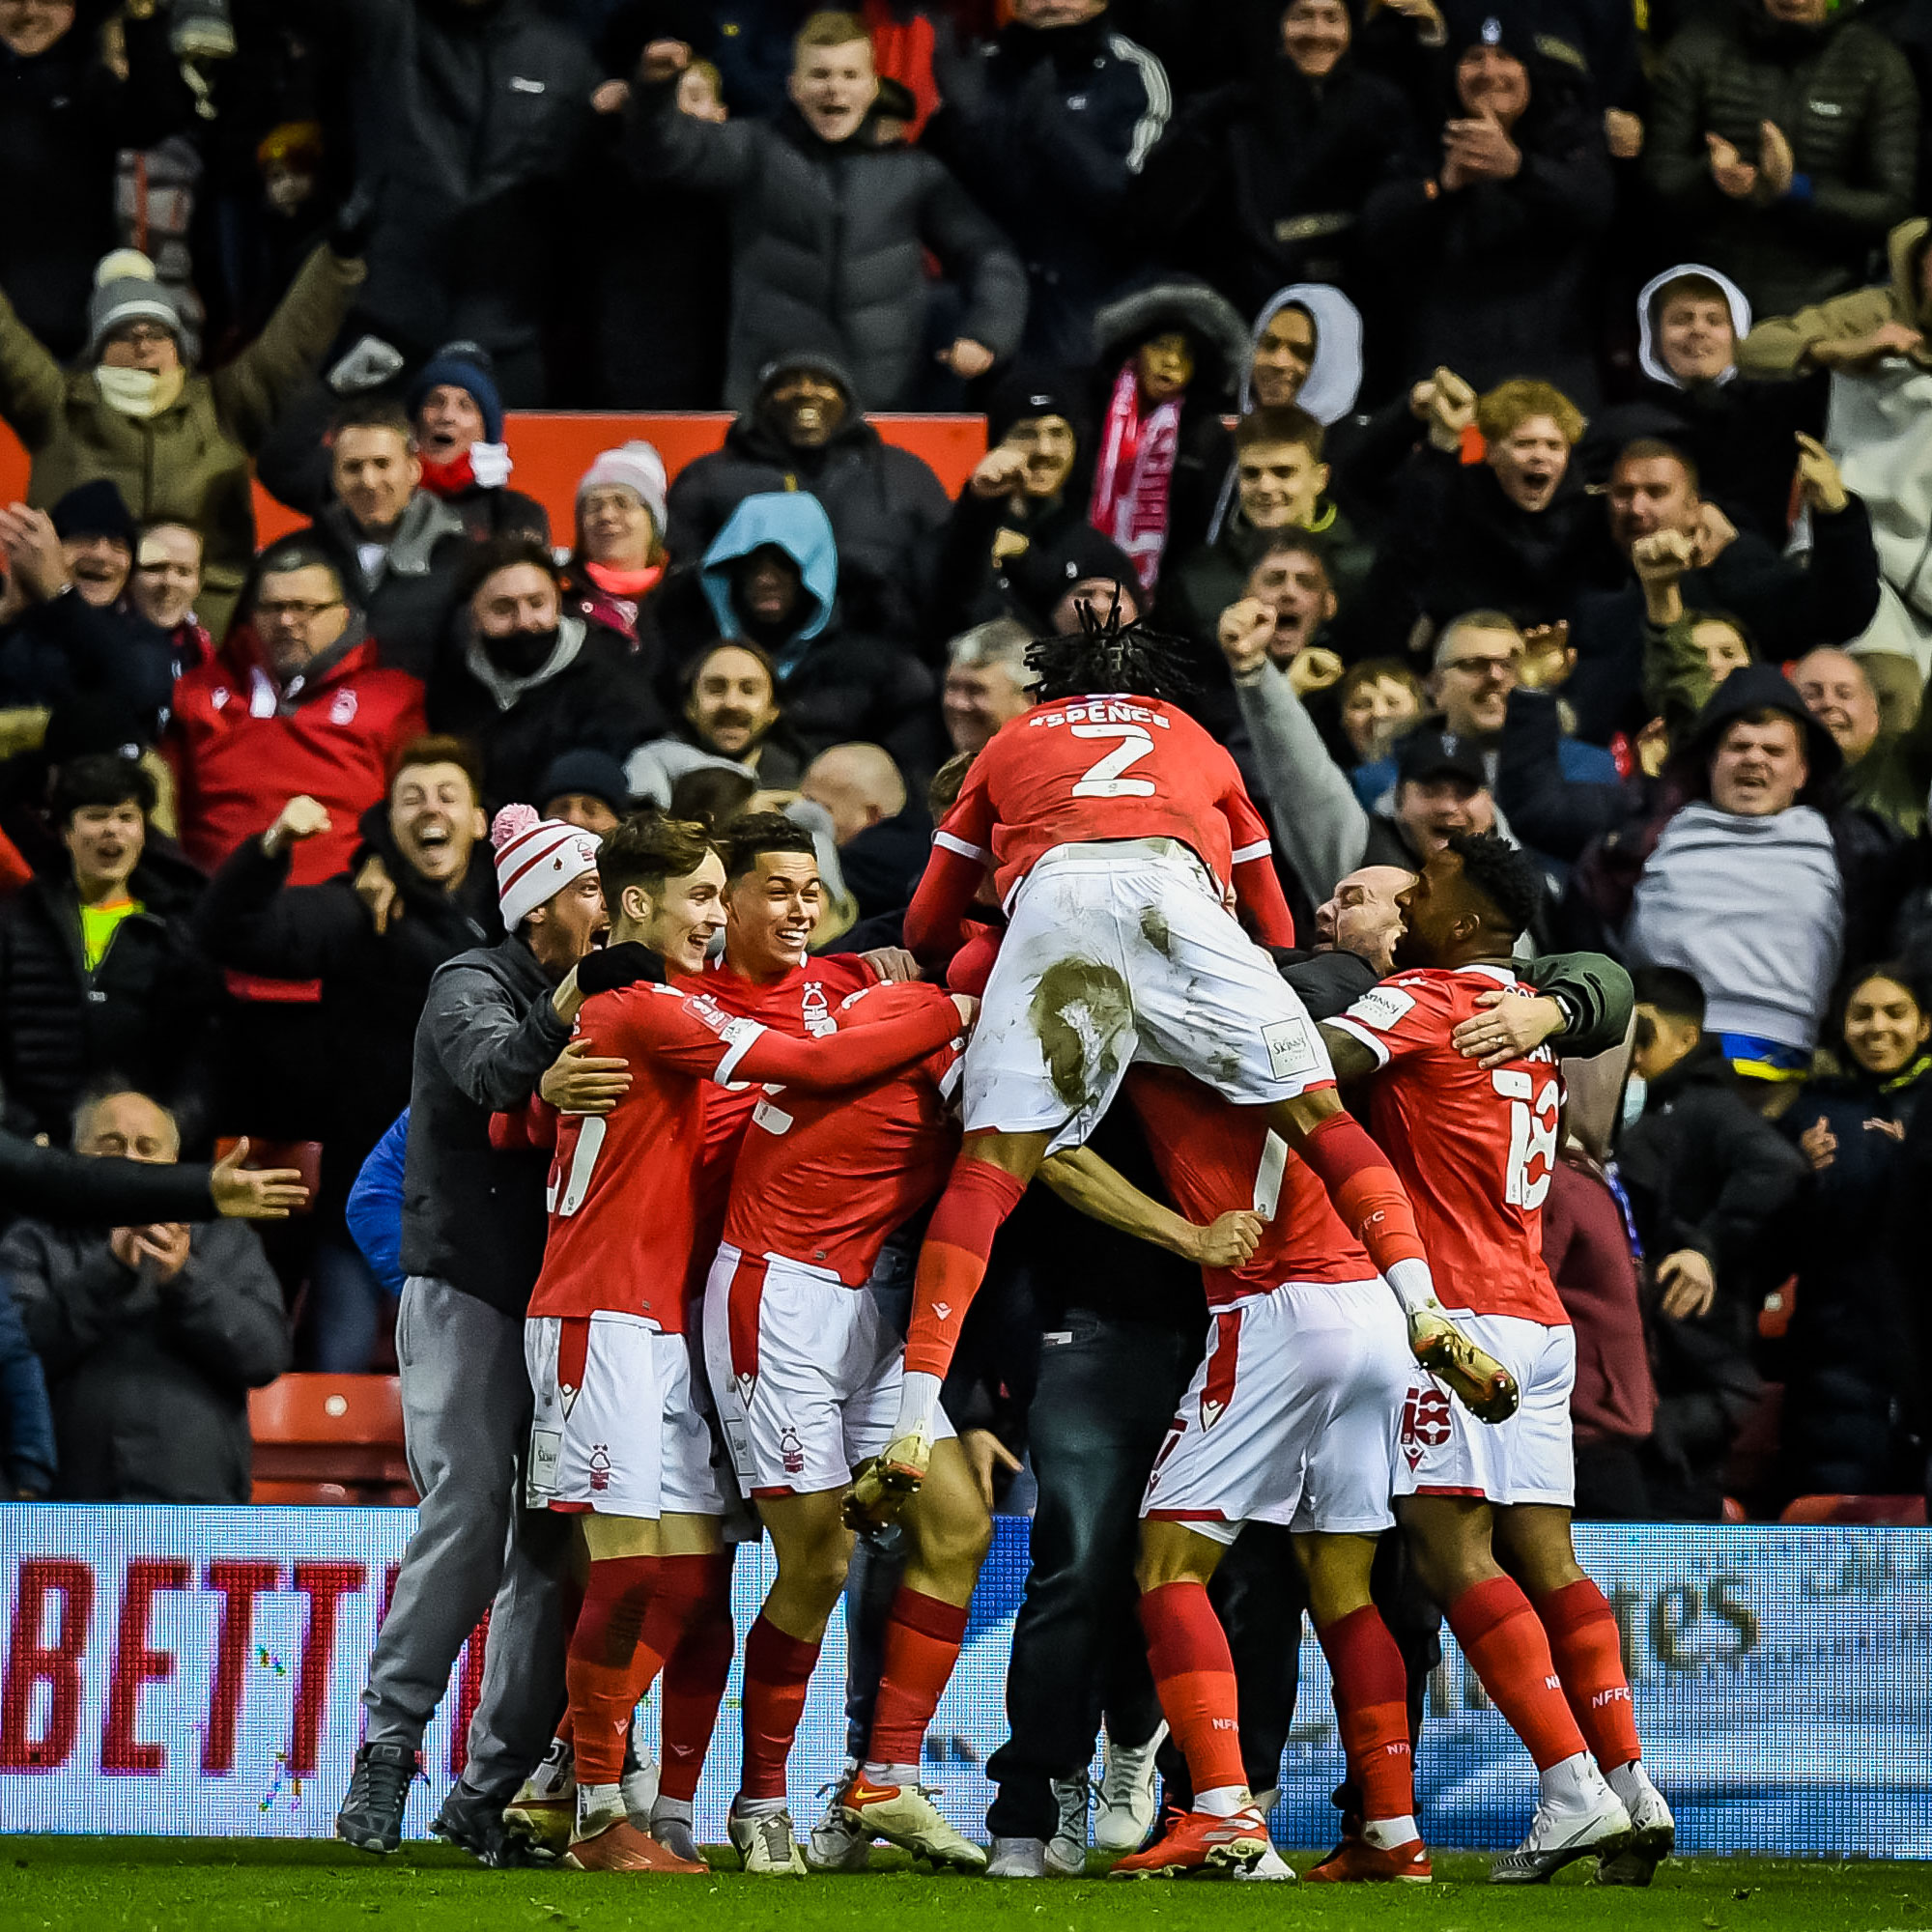 Emirates FA Cup LIVE: Nottingham Forest 1-0 Arsenal; The Gunners exit in the 3rd round of the FA Cup for just the second time in 26 years